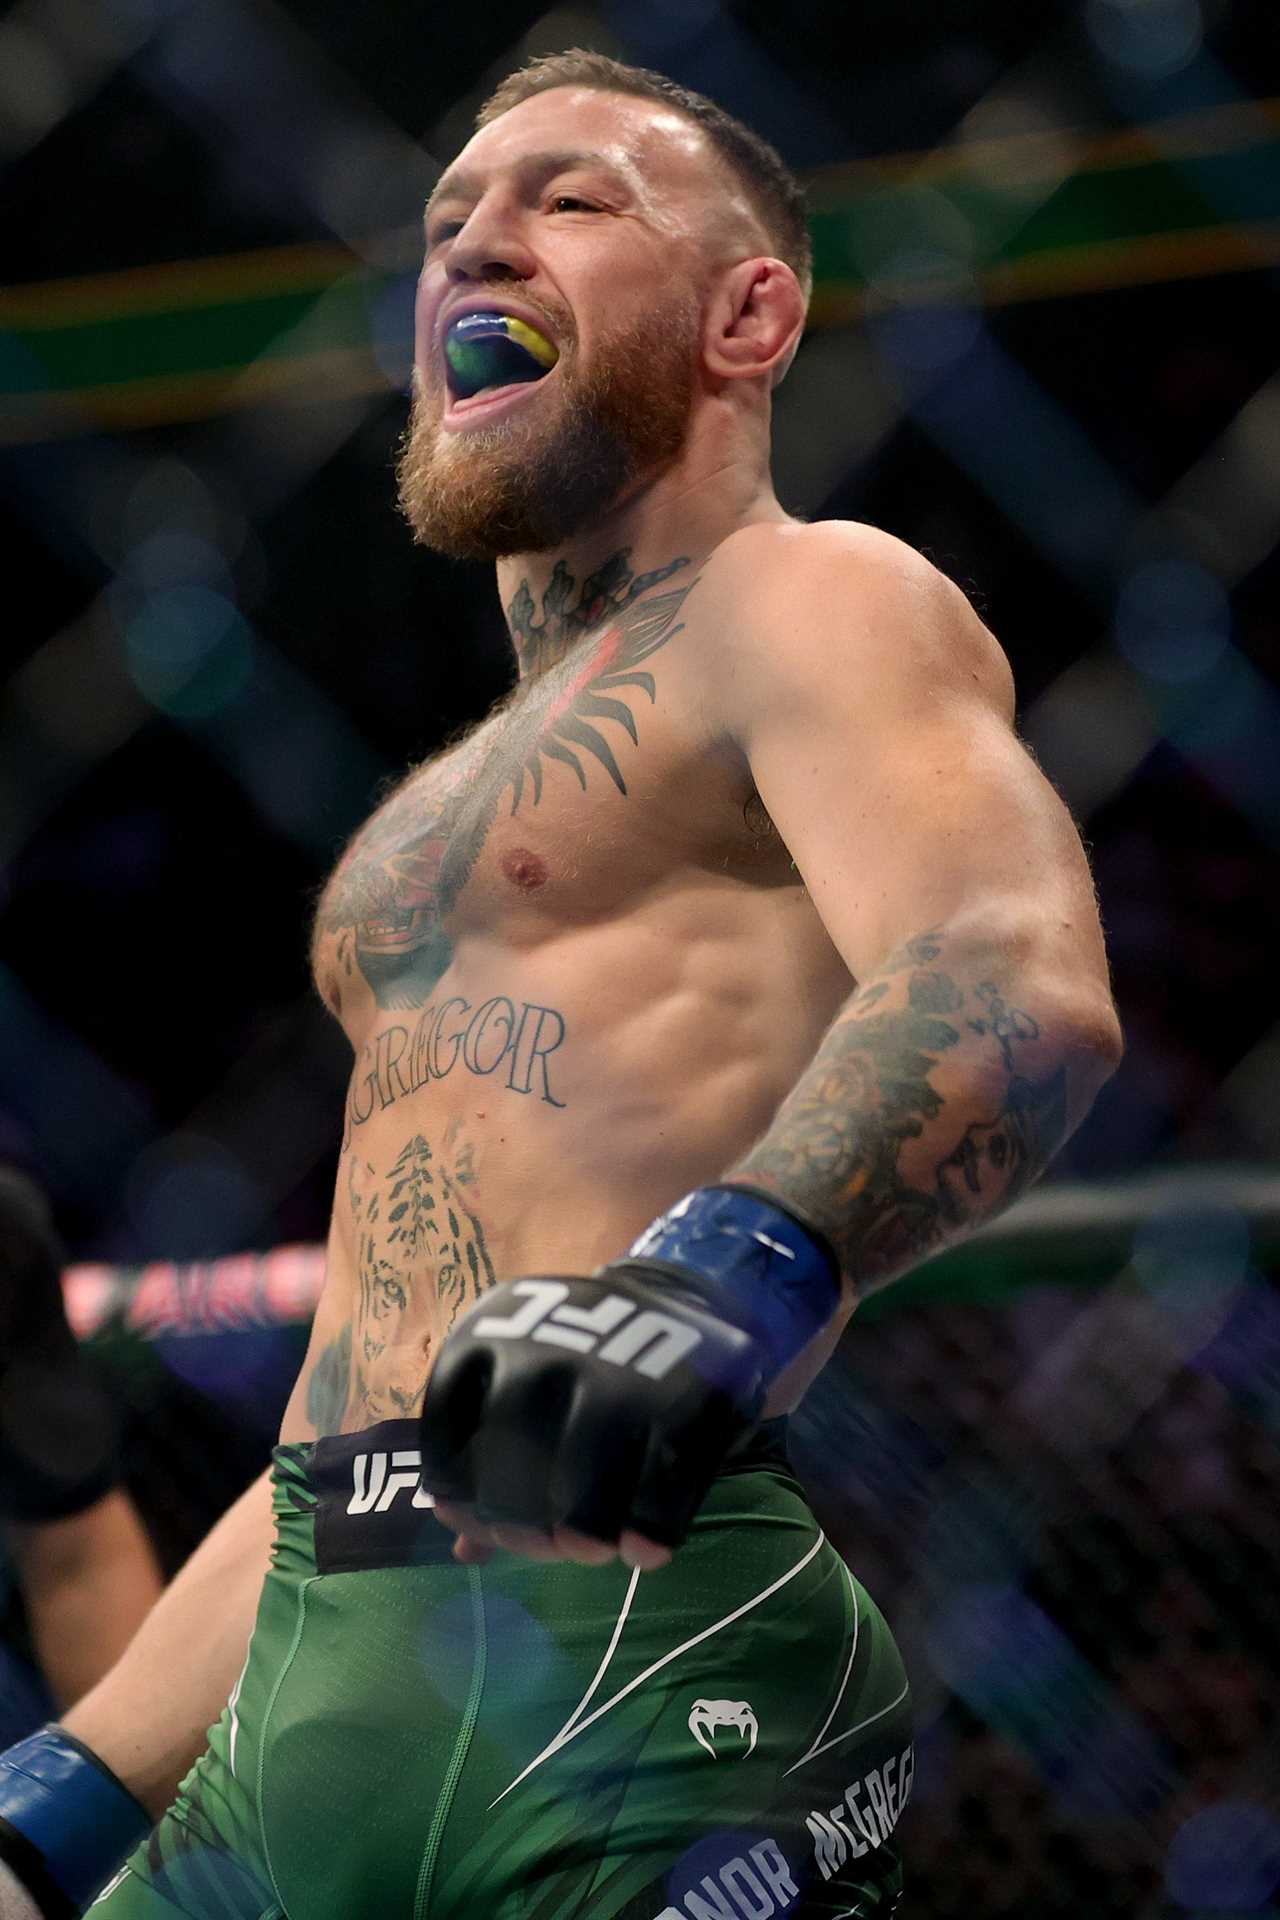 Conor McGregor pledges to quit drinking and will give up whiskey and stout. He will instead focus on UFC's return after the horror leg break.